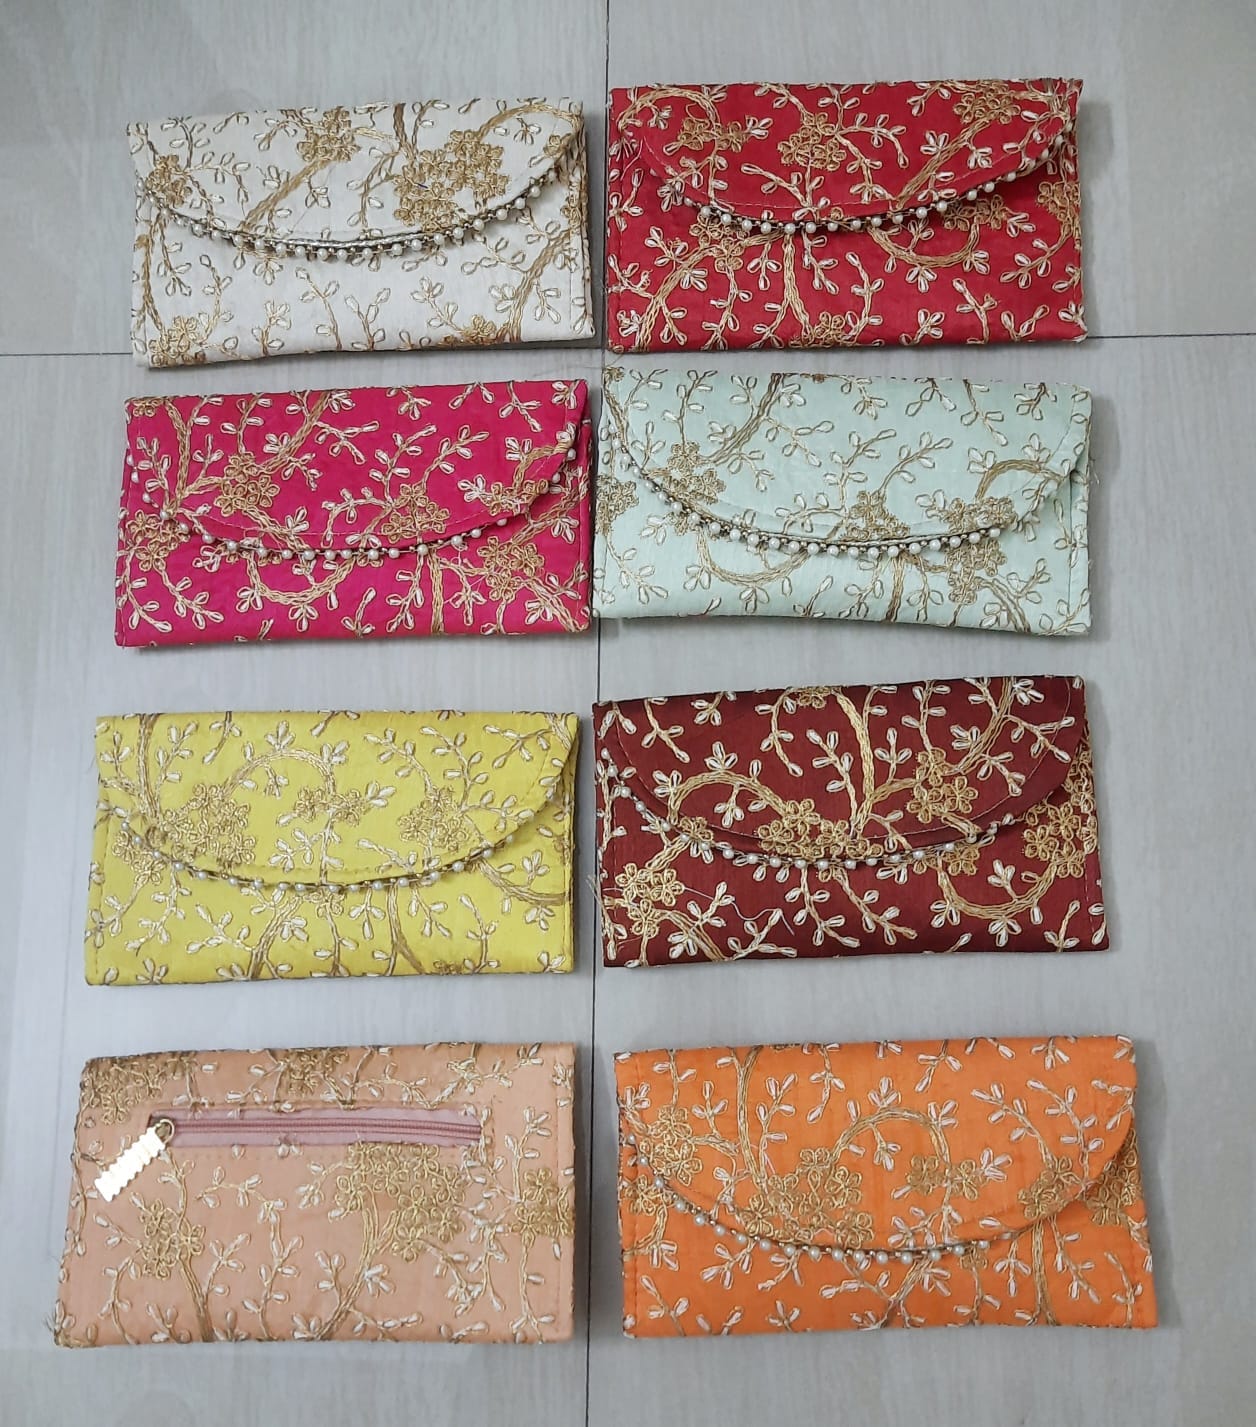 LAMANSH Clutch Assorted colors / Fabric / 9 × 5 inches LAMANSH® (Pack of 20, Assorted Color) 9×5 inch Embroidered Design ladies purse Clutches / Fabric Clutches bags for bridesmaids & giveaways 🎁